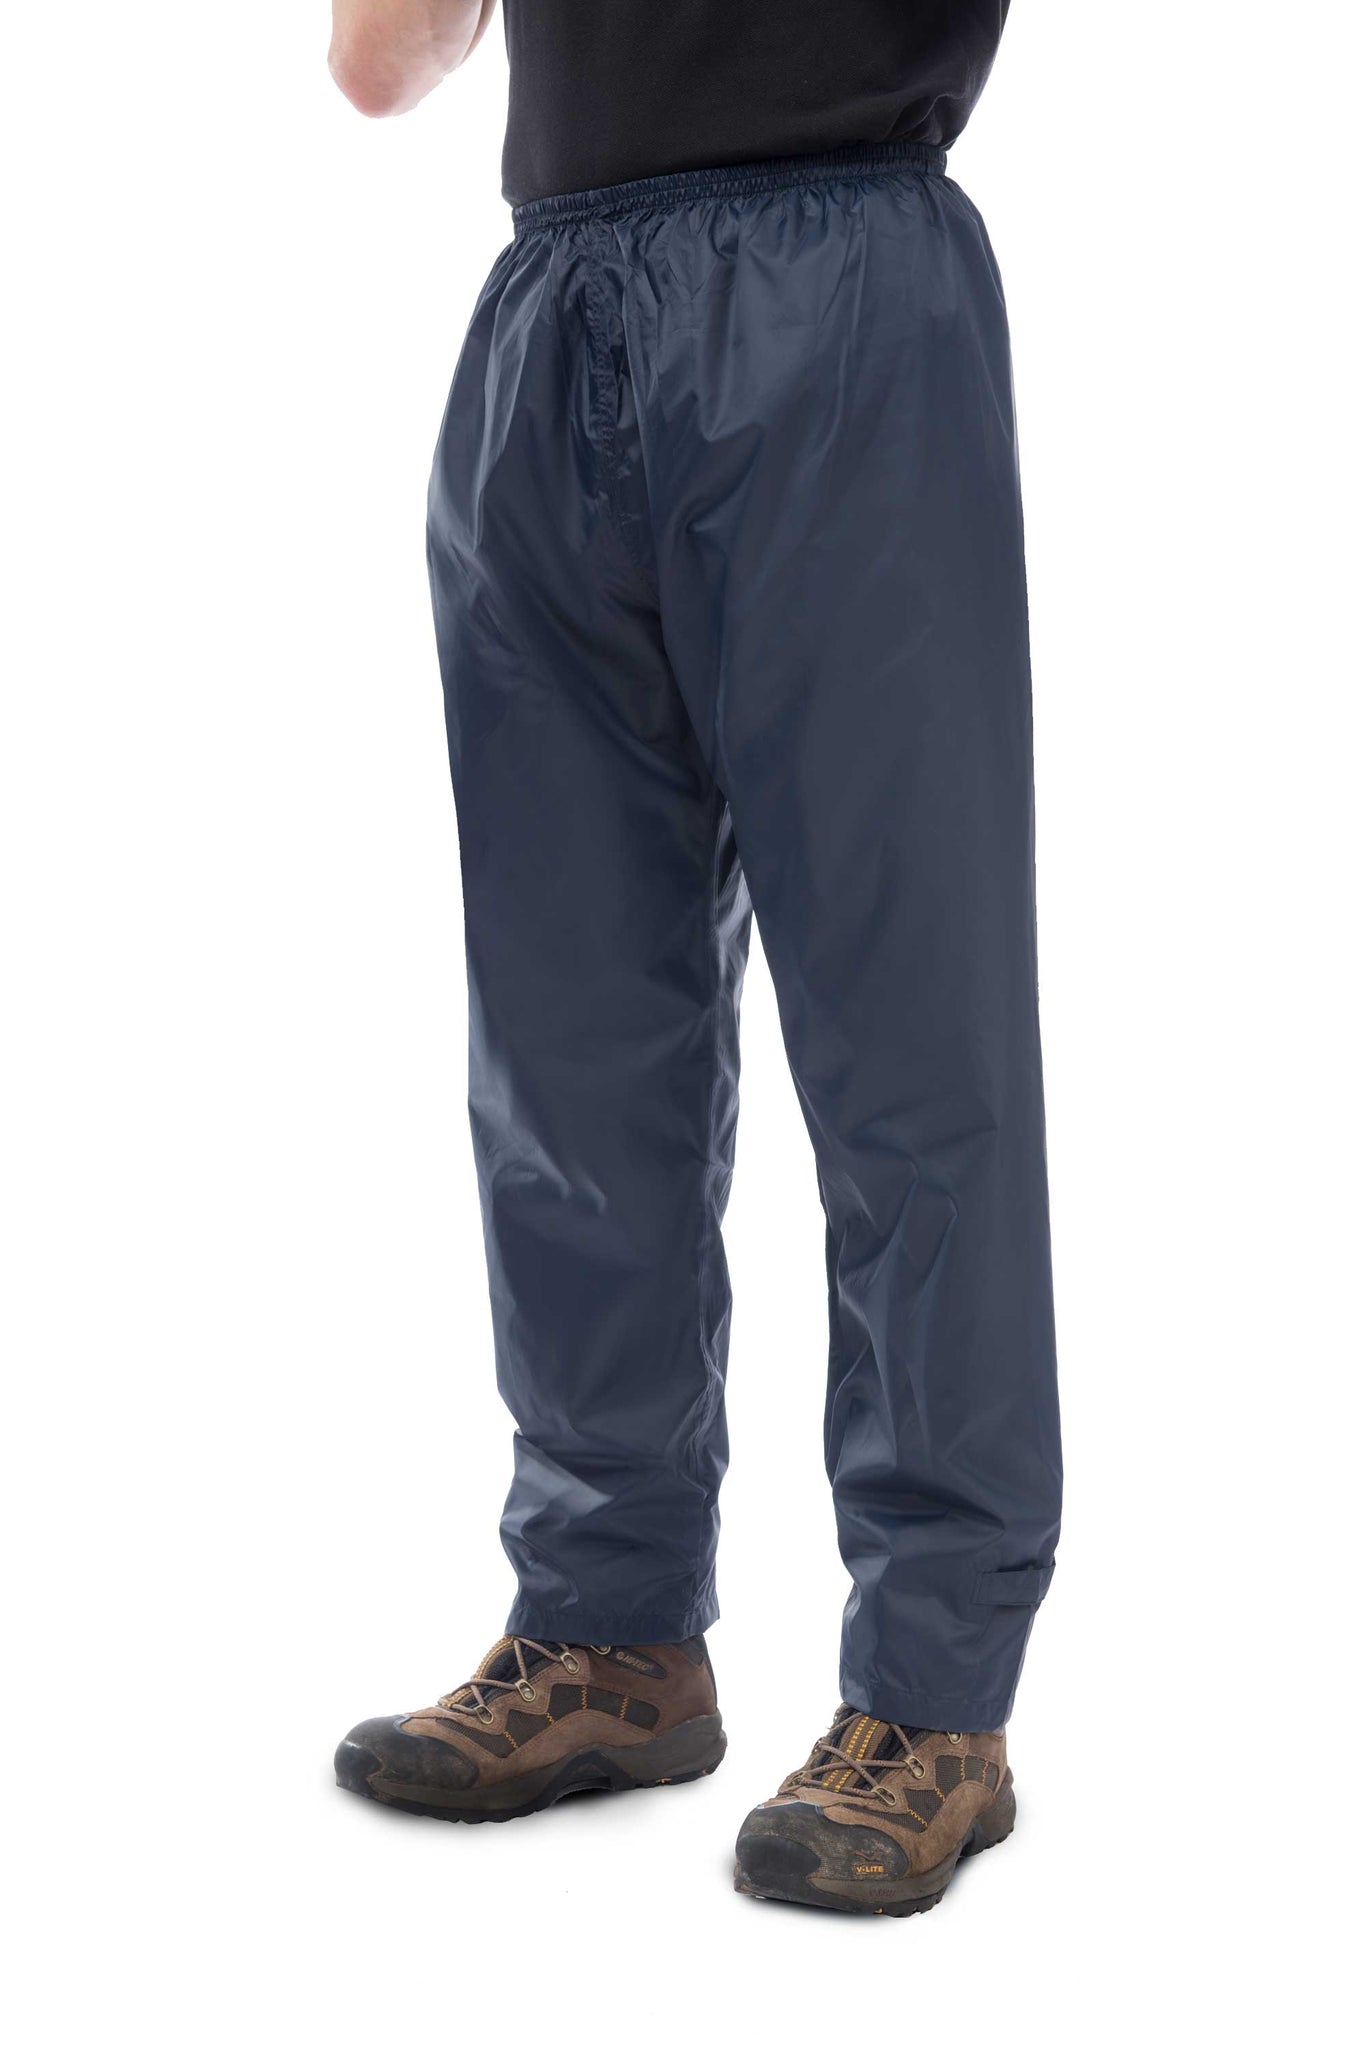 Mac in a Sac UNISEX Waterproof Overtrousers – Quinns Craftshop & Sweater  Shop